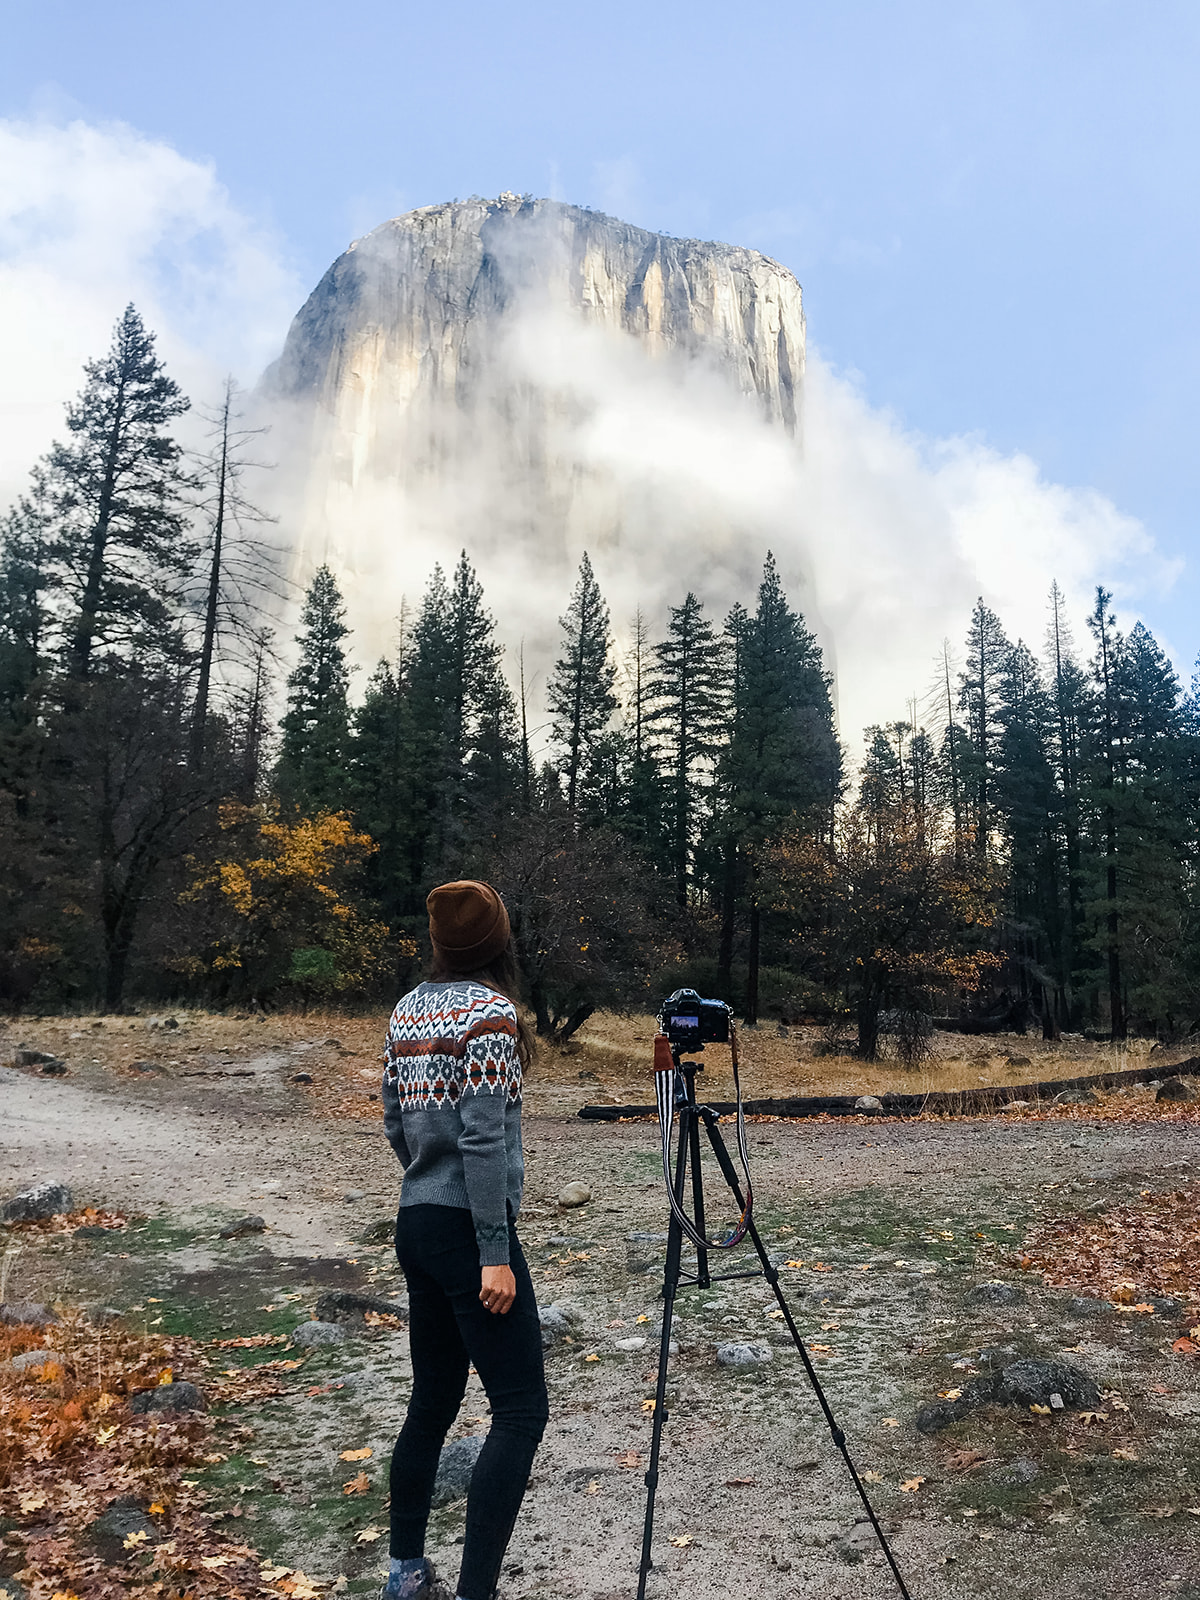 I was standing by our campground where I overlooked the Half Done, a granite dome in Yosemite Valley. I had my camera propped up and ready to take the breathtaking views of clouds surrounding the Half Dome. 